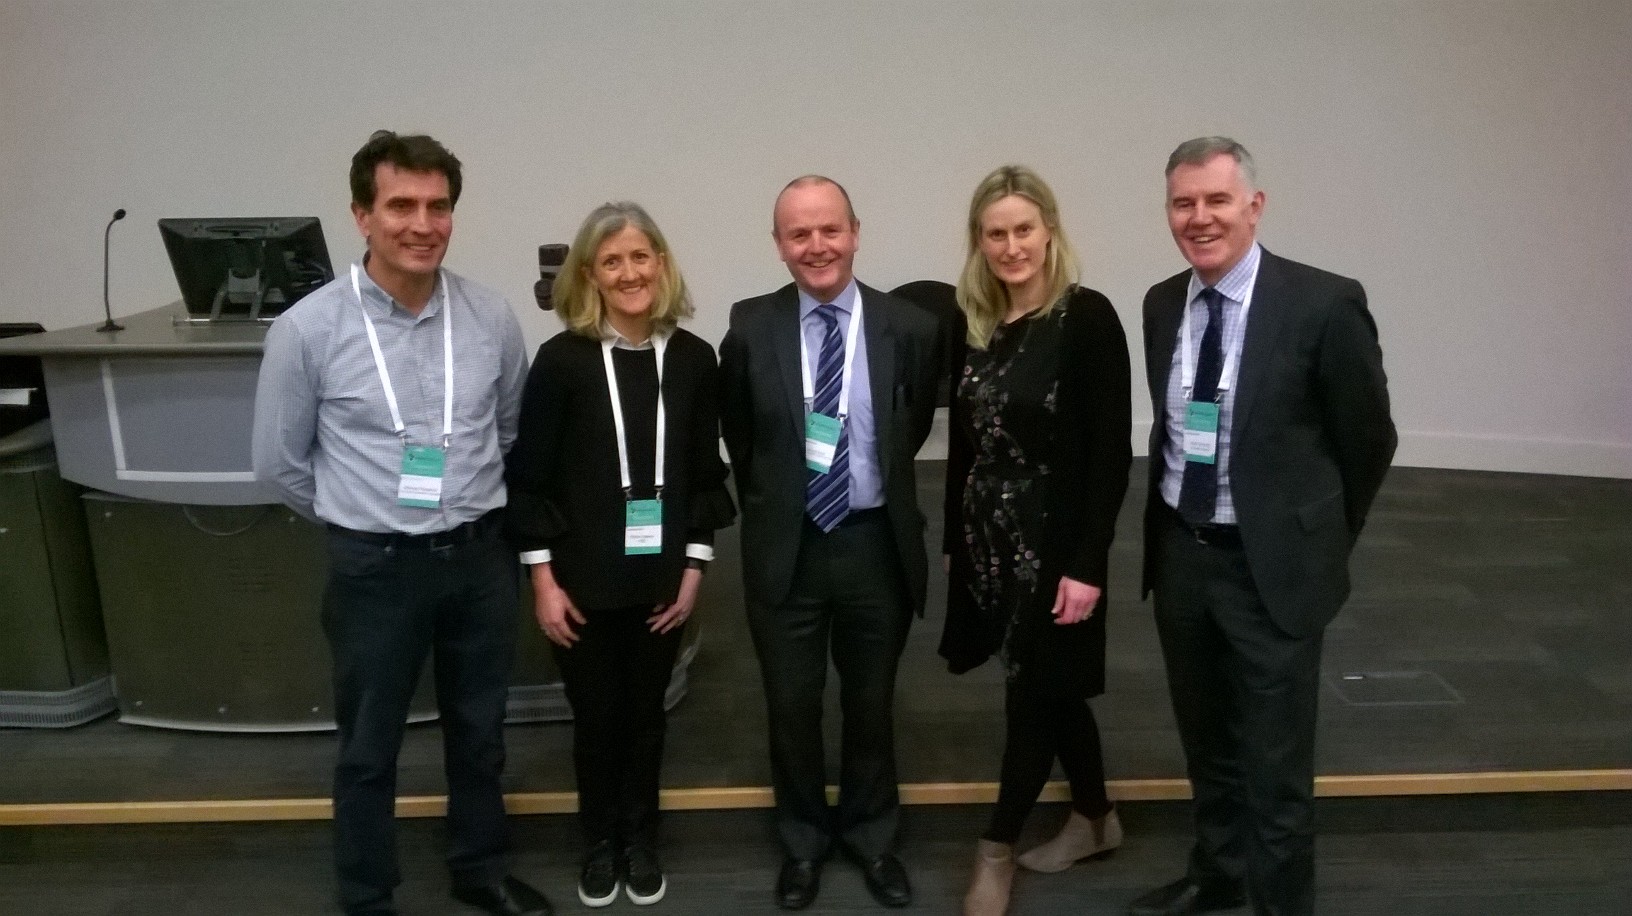 eHealth Ireland and Northern Ireland Connected Health Ecosystems Gathering